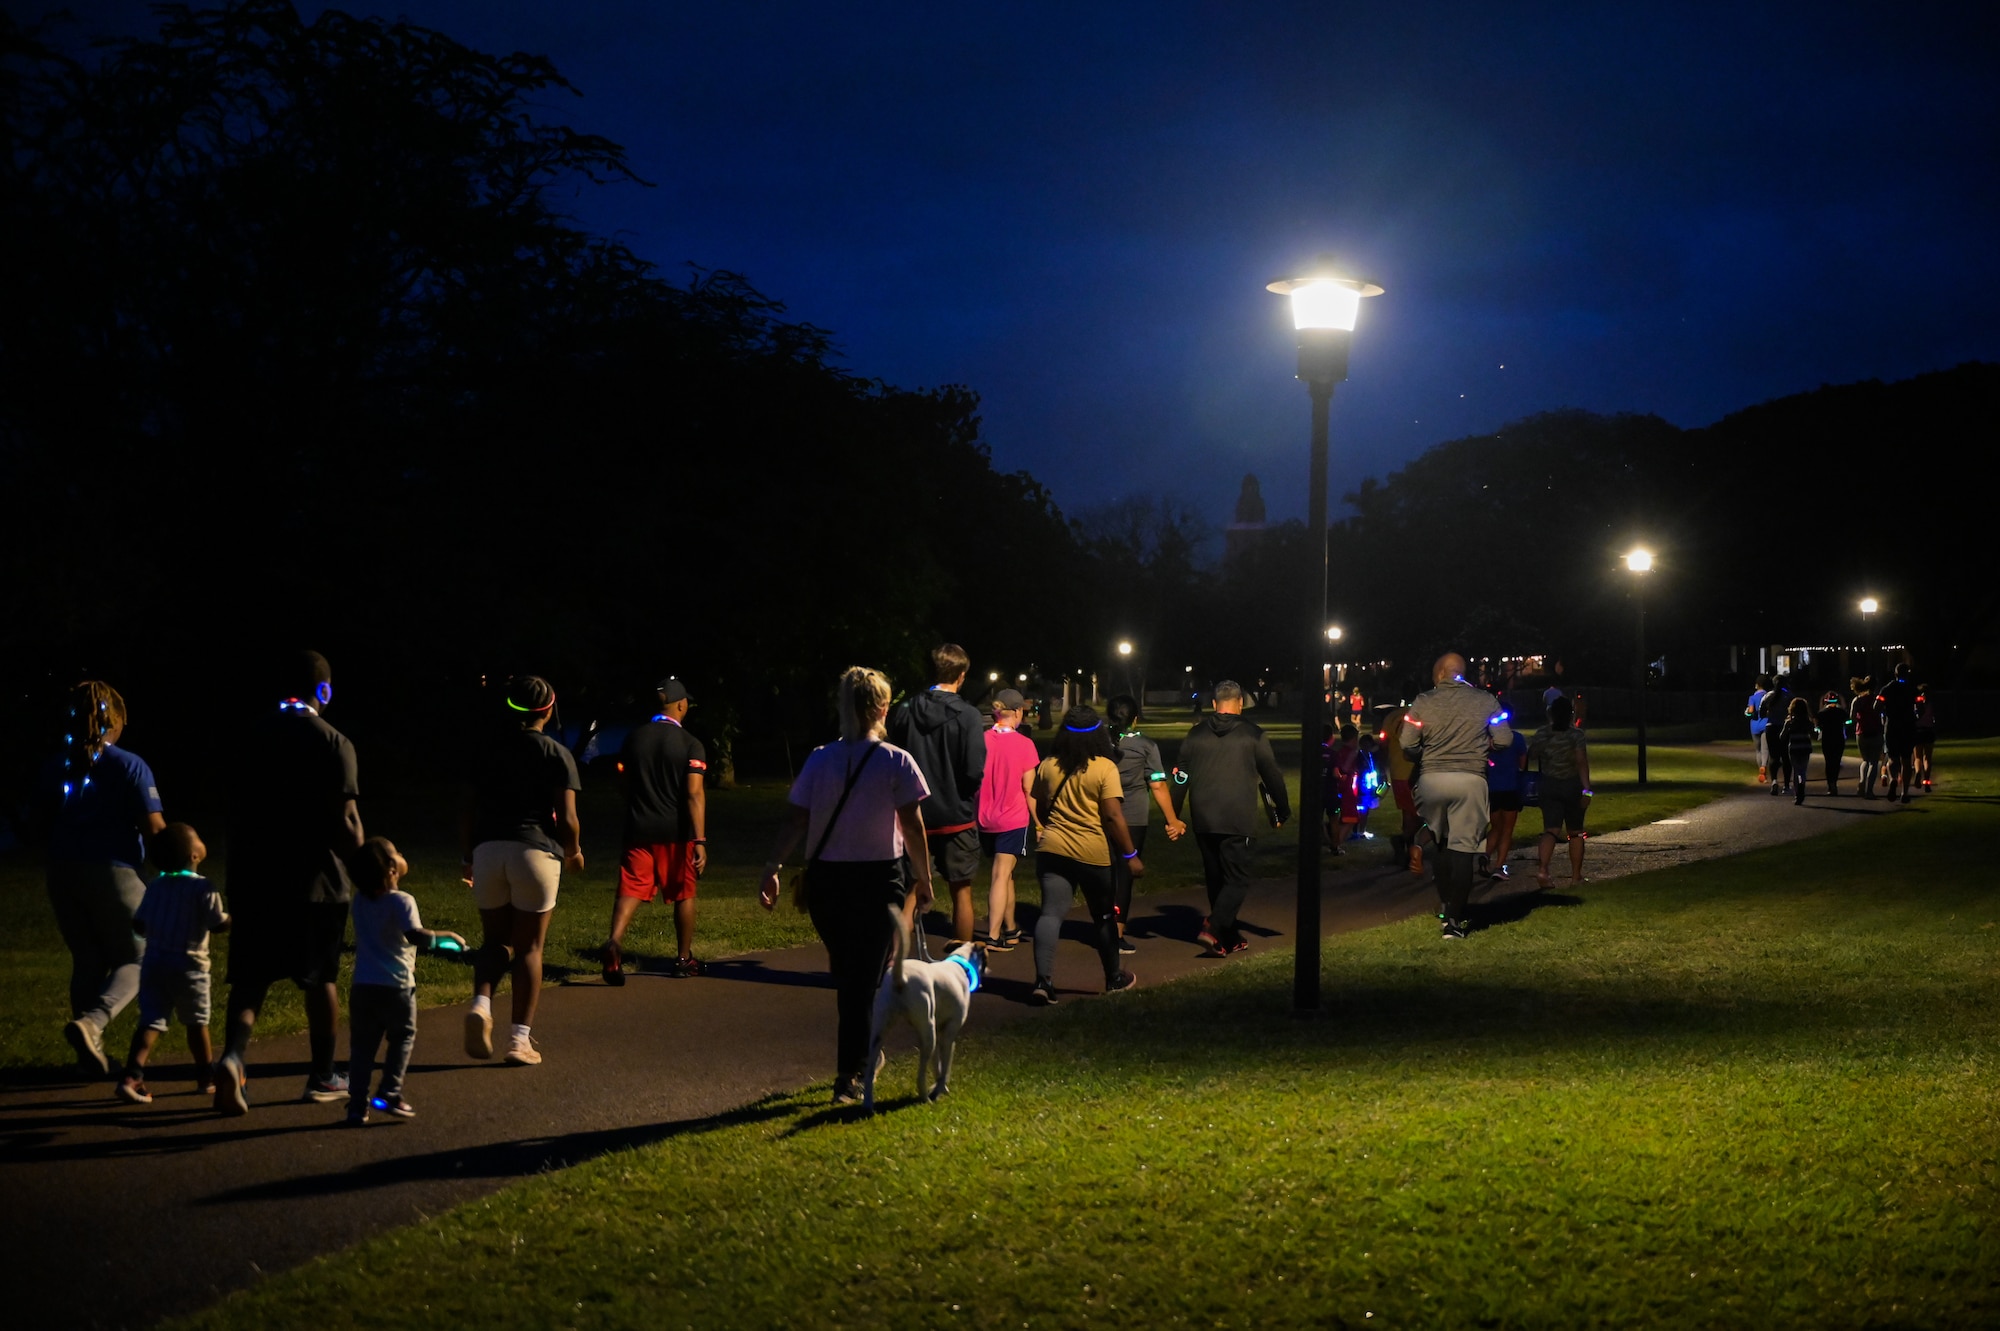 Service members and their families walk and run during a Sexual Assault Awareness Prevention Month glow run at the Missing Man Trail on Joint Base Pearl Harbor-Hickam, Hawaii, Mar. 31, 2023. The run was held to increase awareness of sexual assault within the military and provide helpful resources. (U.S. Air Force photo by Staff Sgt. Alan Ricker)